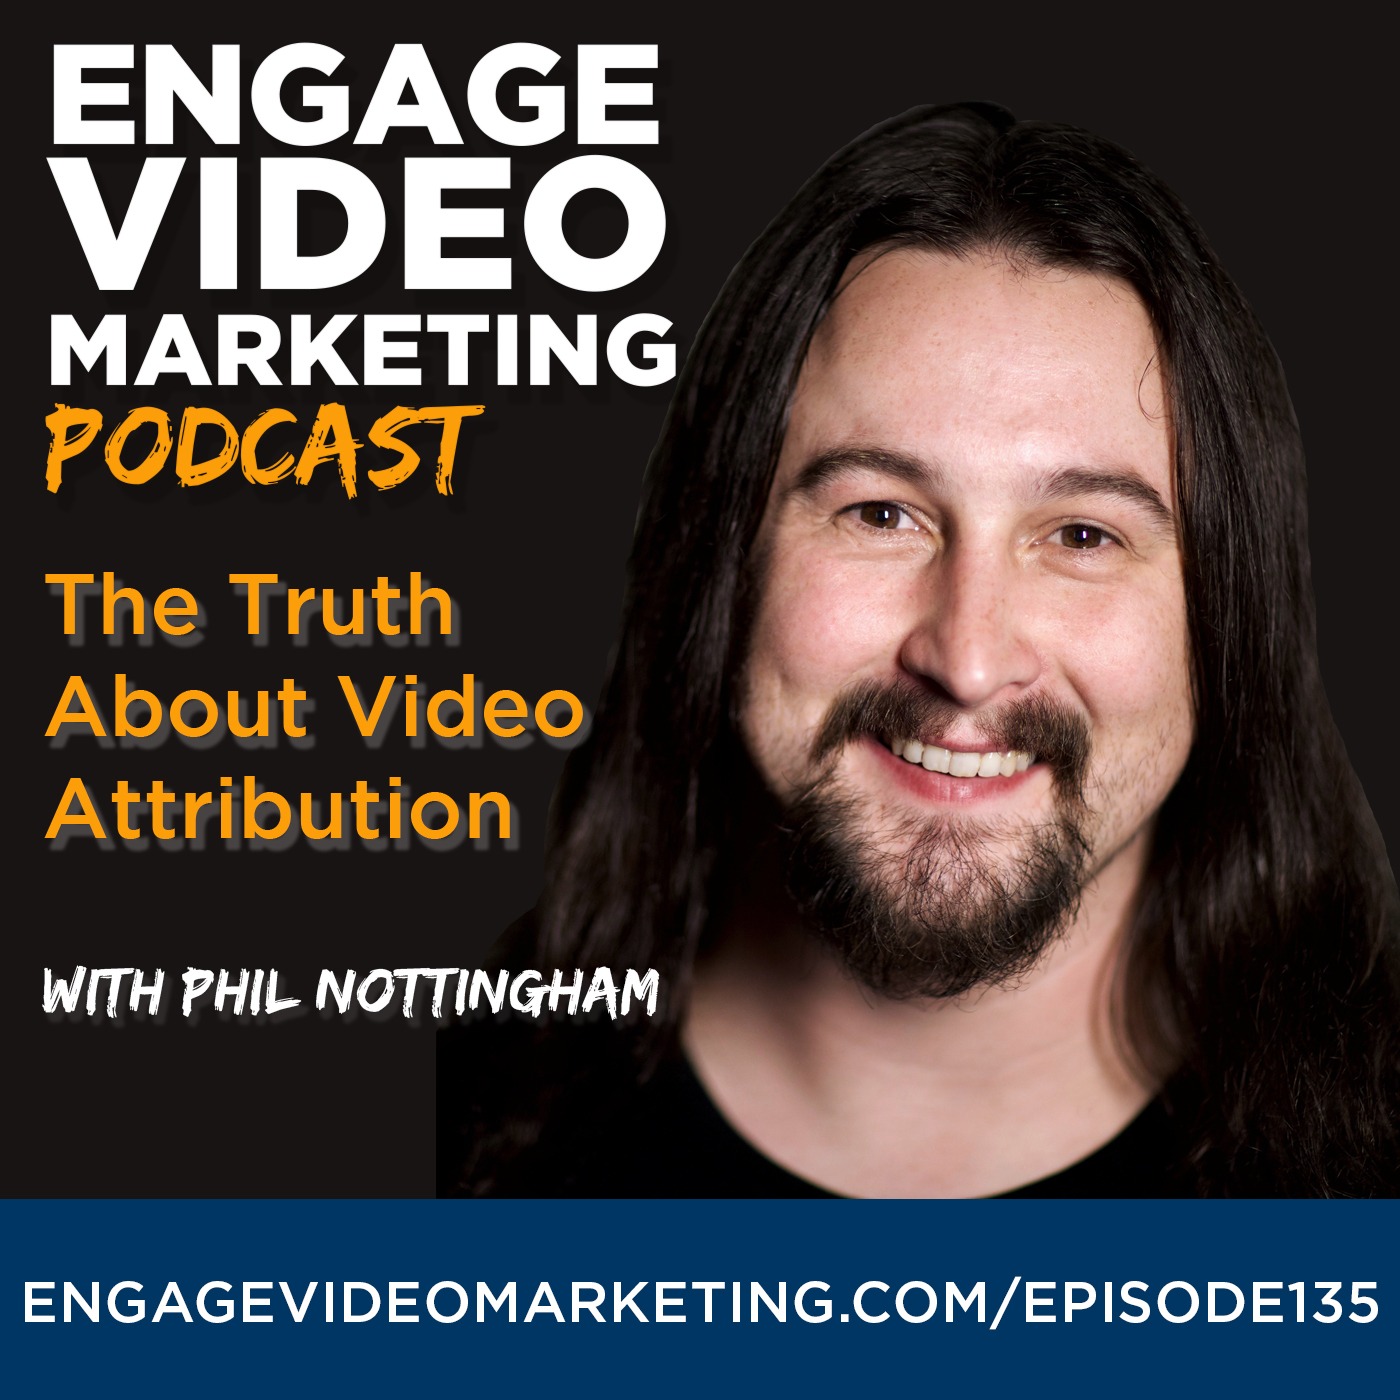 The Truth About Video Attribution with Phil Nottingham